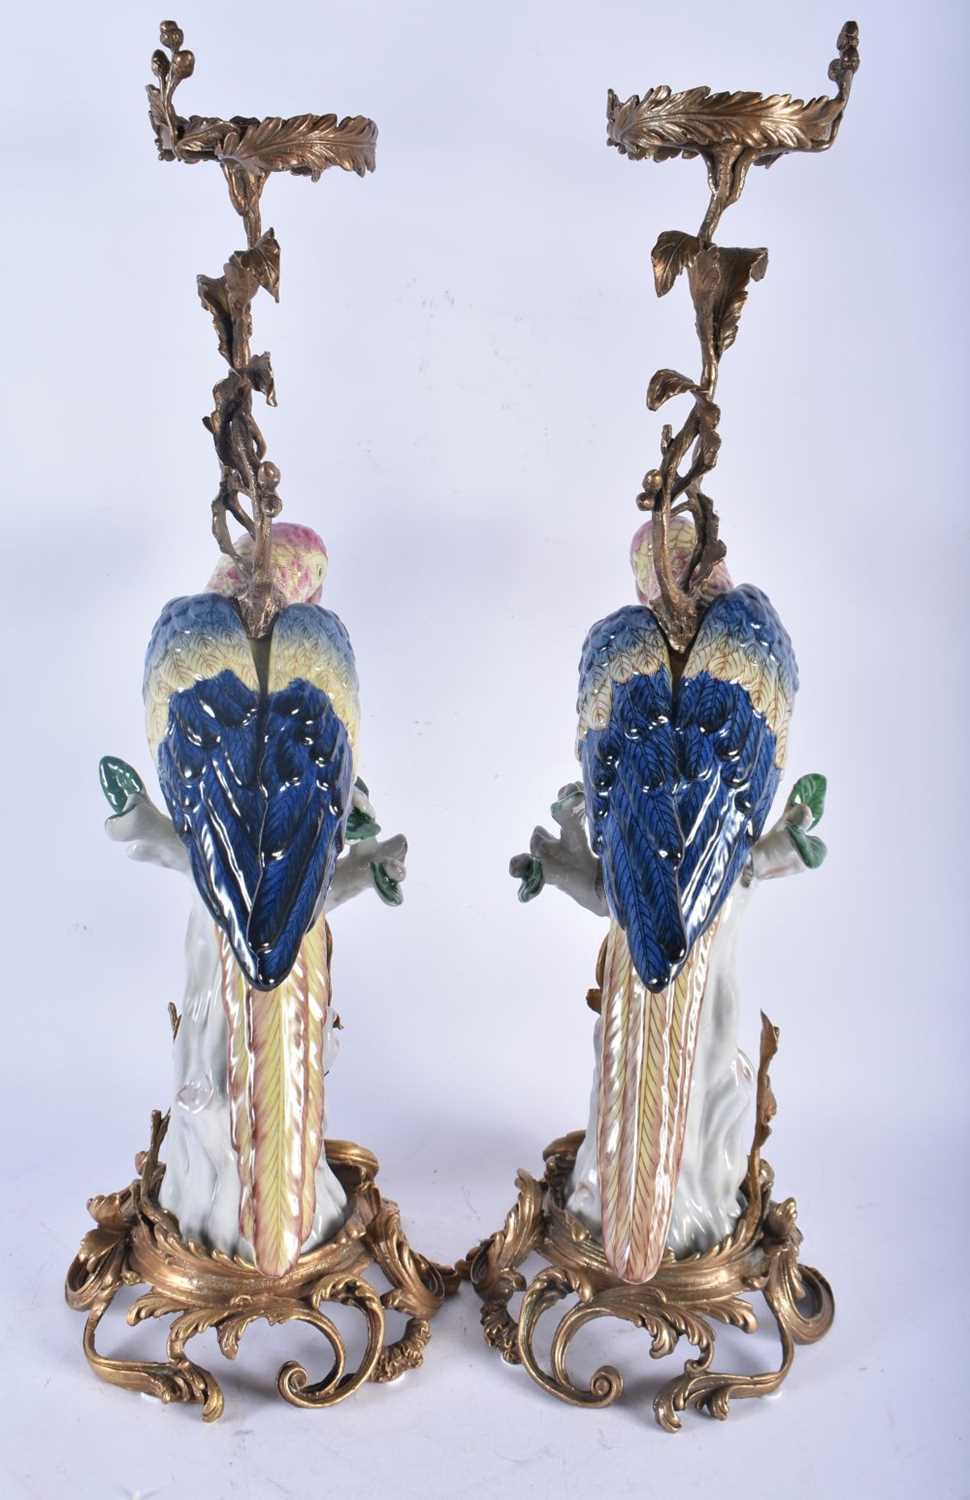 A LARGE PAIR OF CONTINENTAL PORCELAIN ORMOLU AND BRONZE PARROT CANDLESTICKS. 56 cm high. - Image 5 of 6